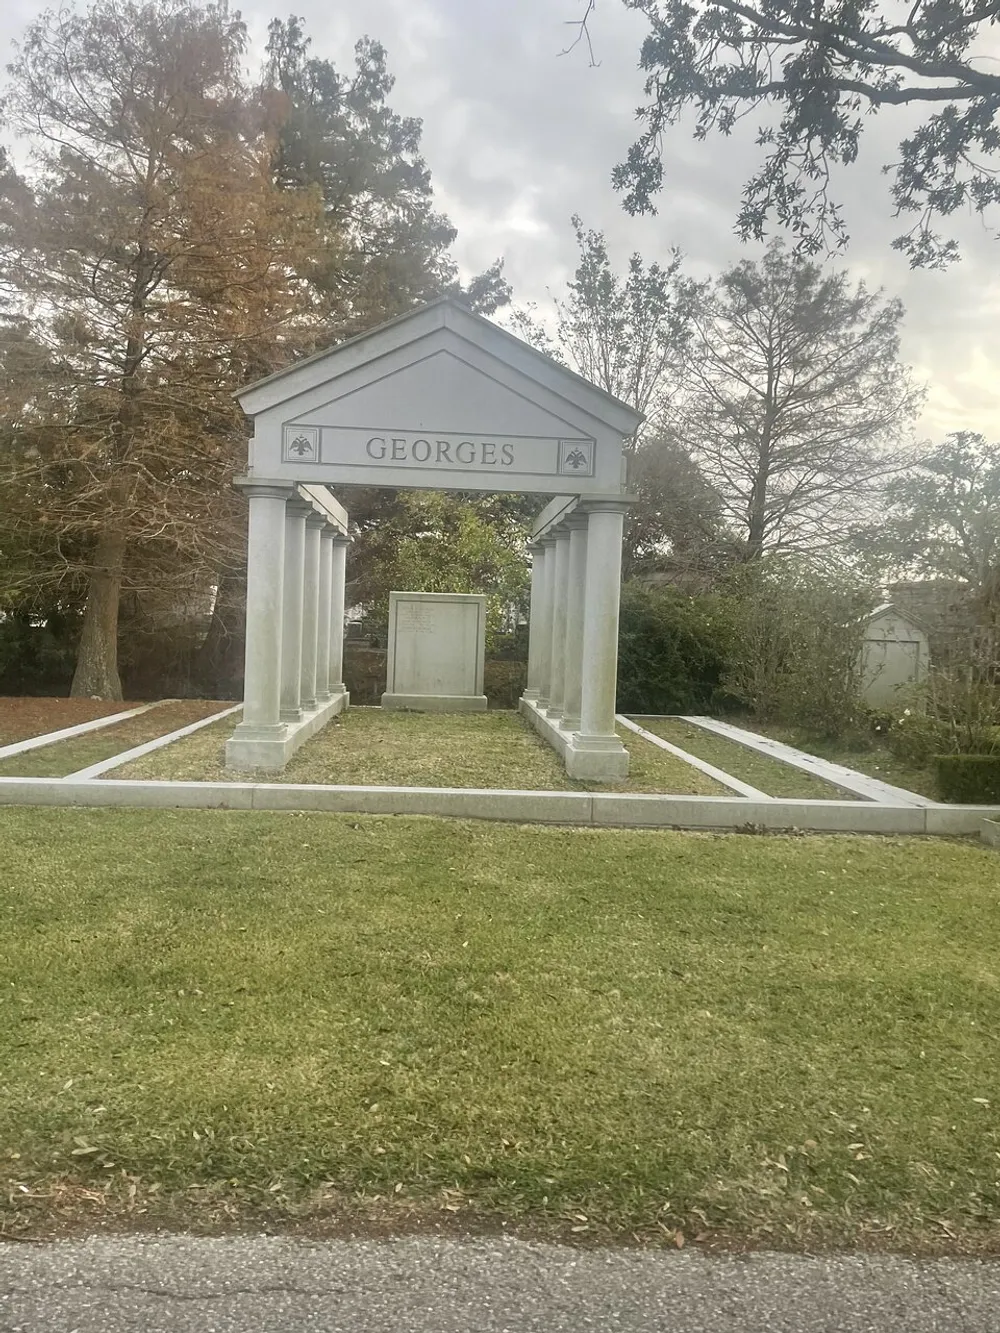 The image shows an elegant classical-style family mausoleum with the name GEORGES inscribed at the top surrounded by trees under a cloudy sky